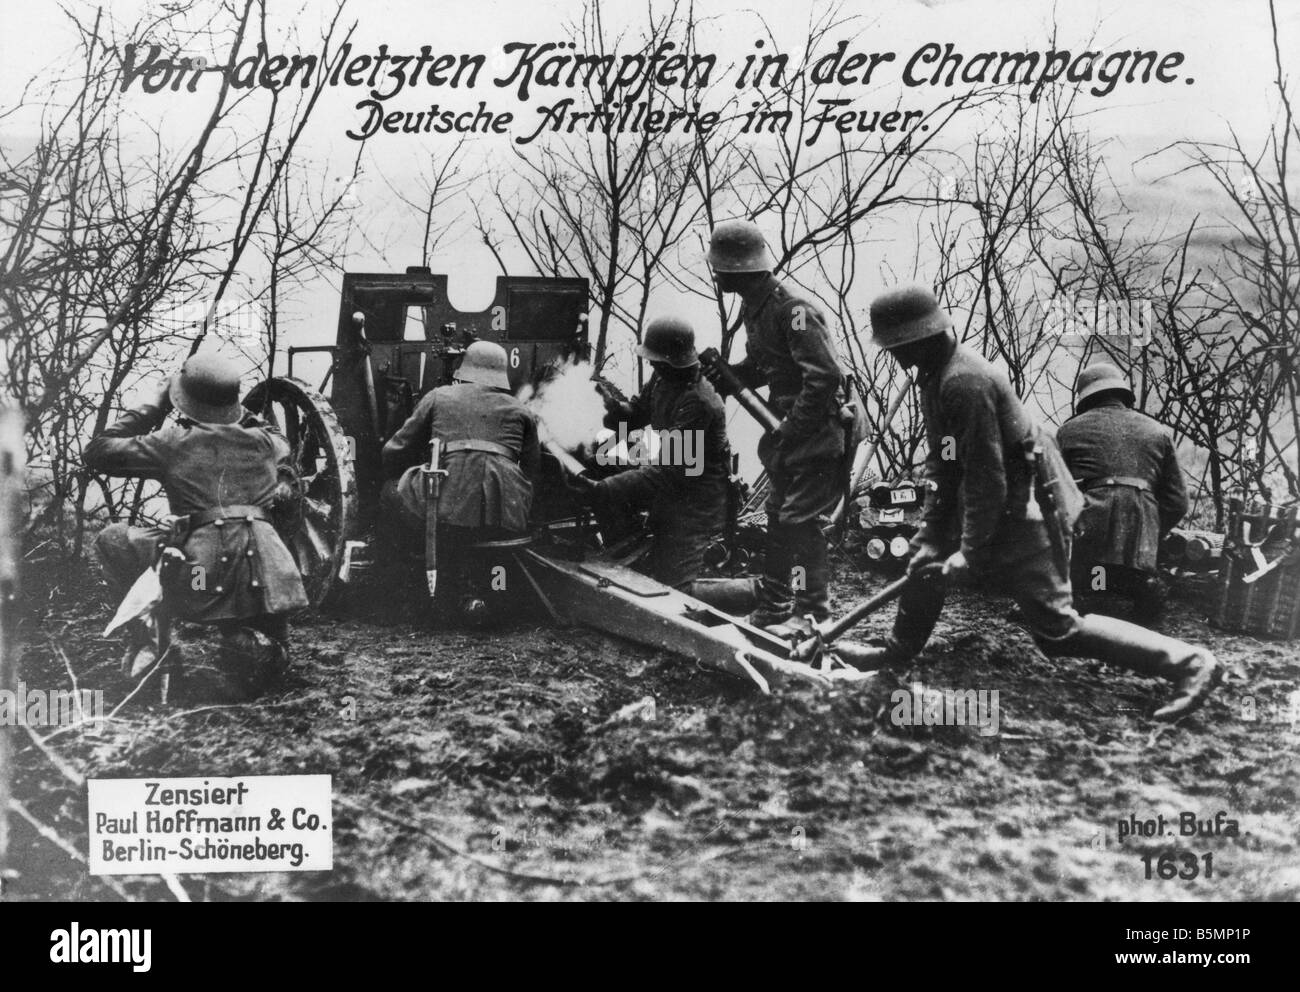 9 1914 0 0 A25 Ger Artillery 1914 18 World War 1 1914 18 Western Front German artillery in Champagne Photo Stock Photo